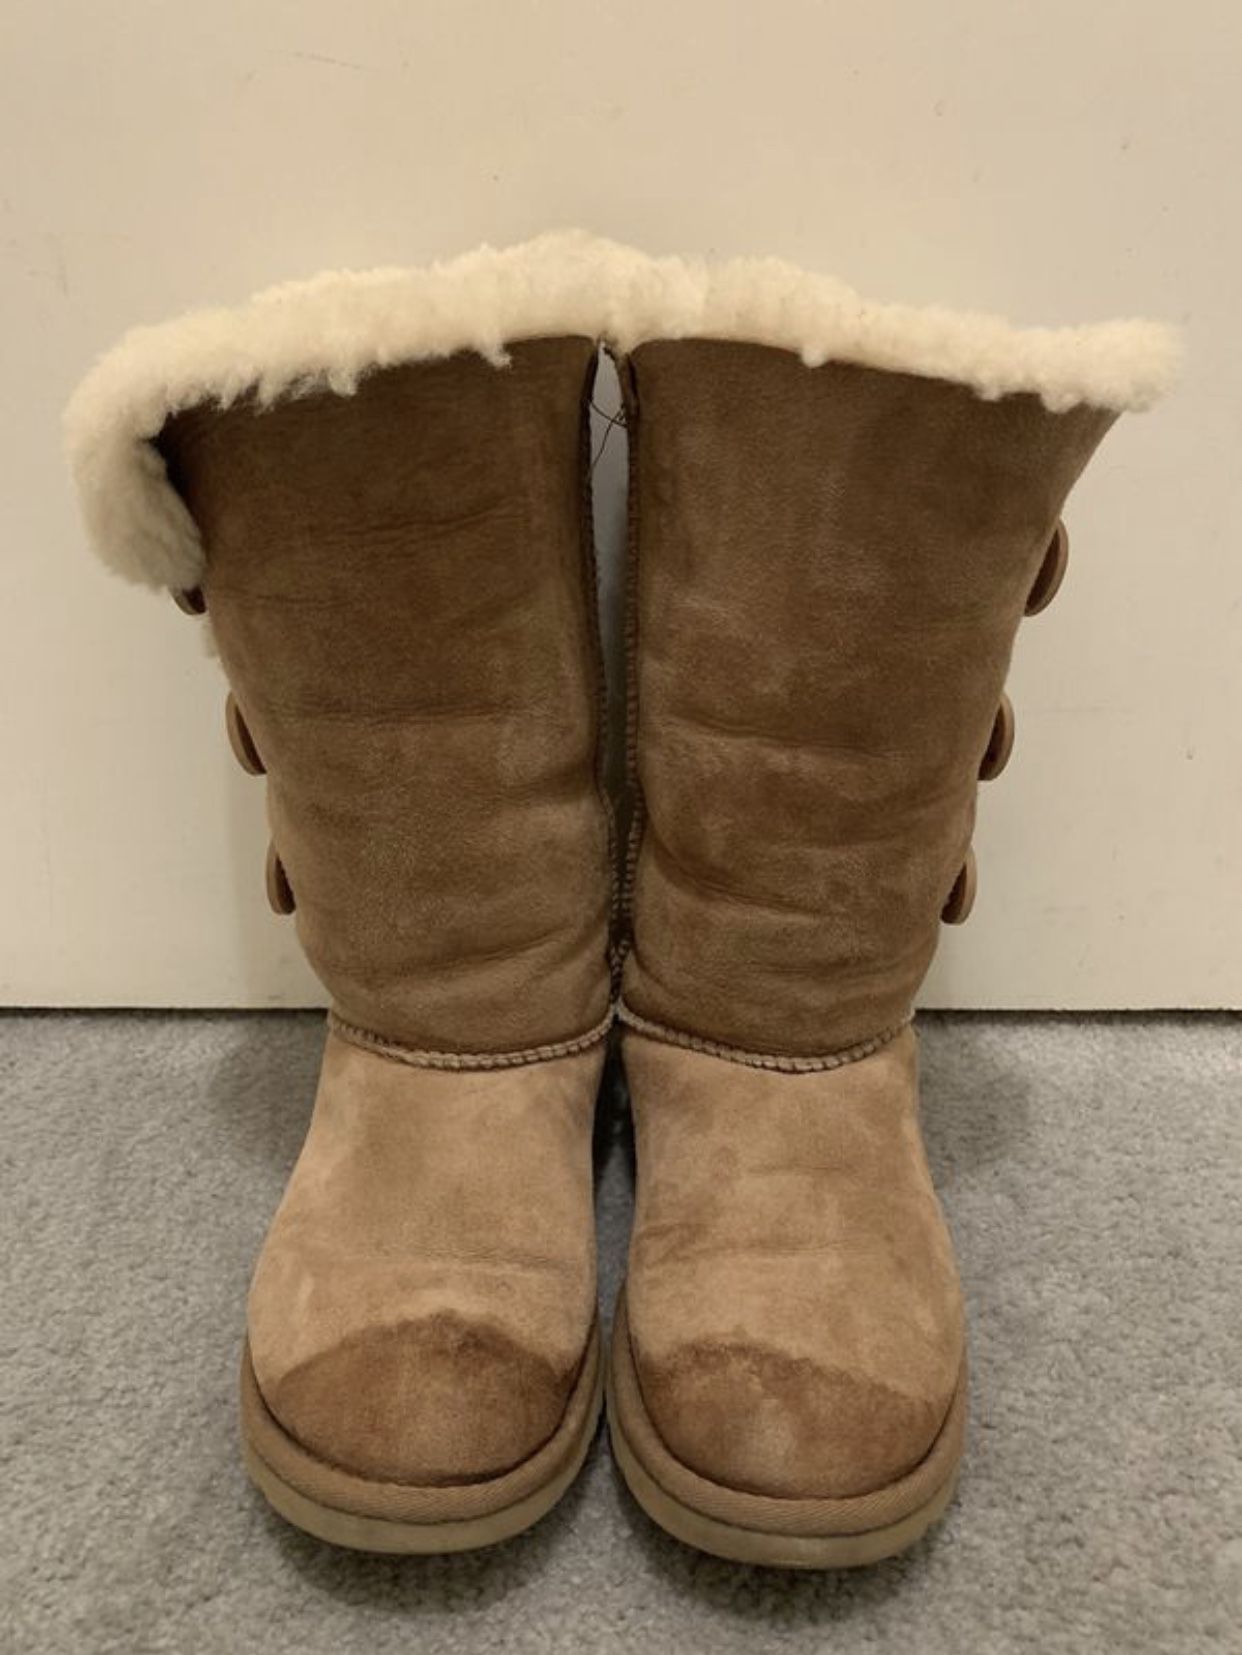 Authentic Chestnut UGG boots